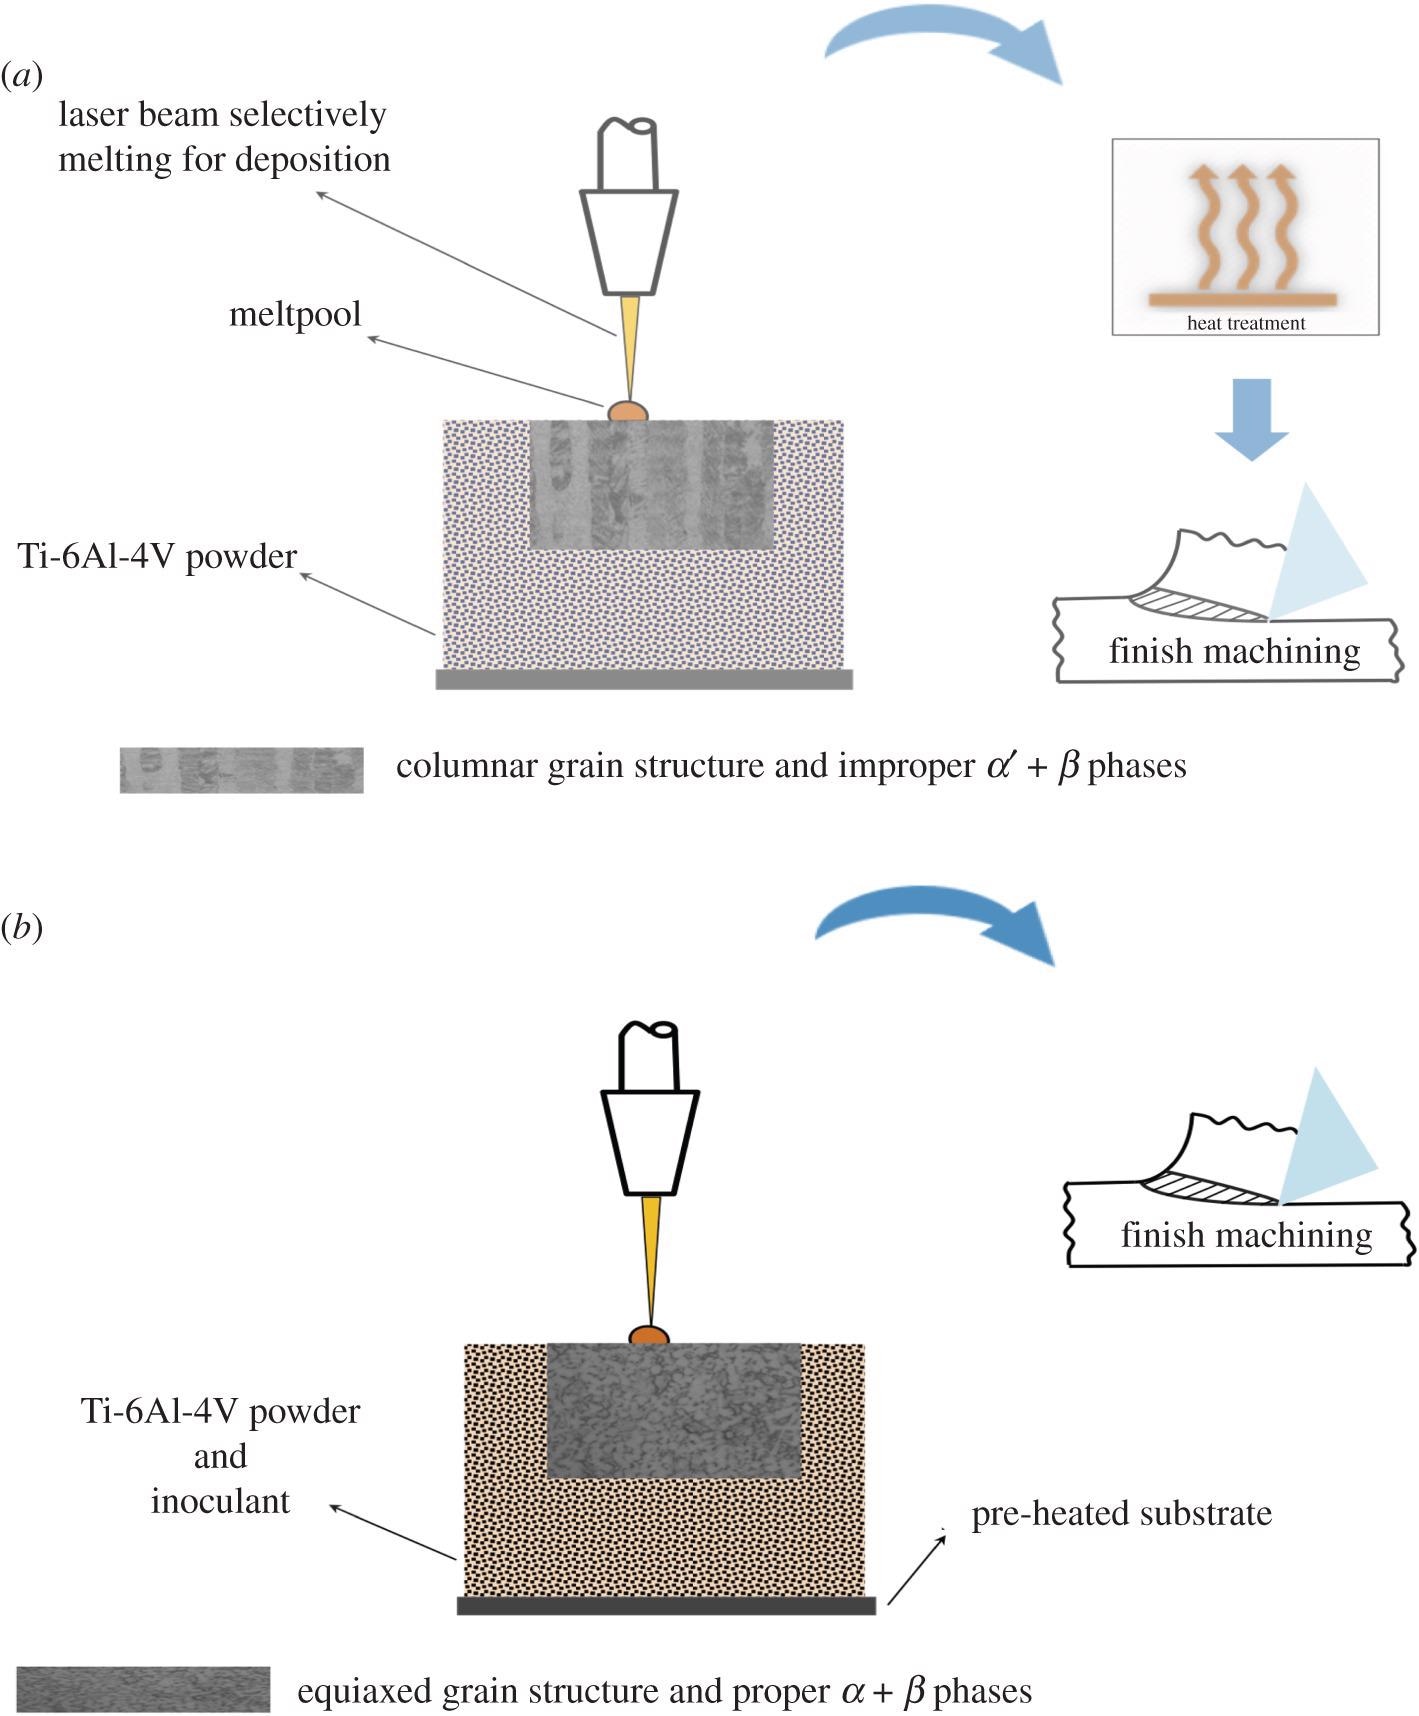 Additive manufacturing as a frugal process. (a) Selective laser melting as an AM process, (b) selective laser melting as a frugal process.